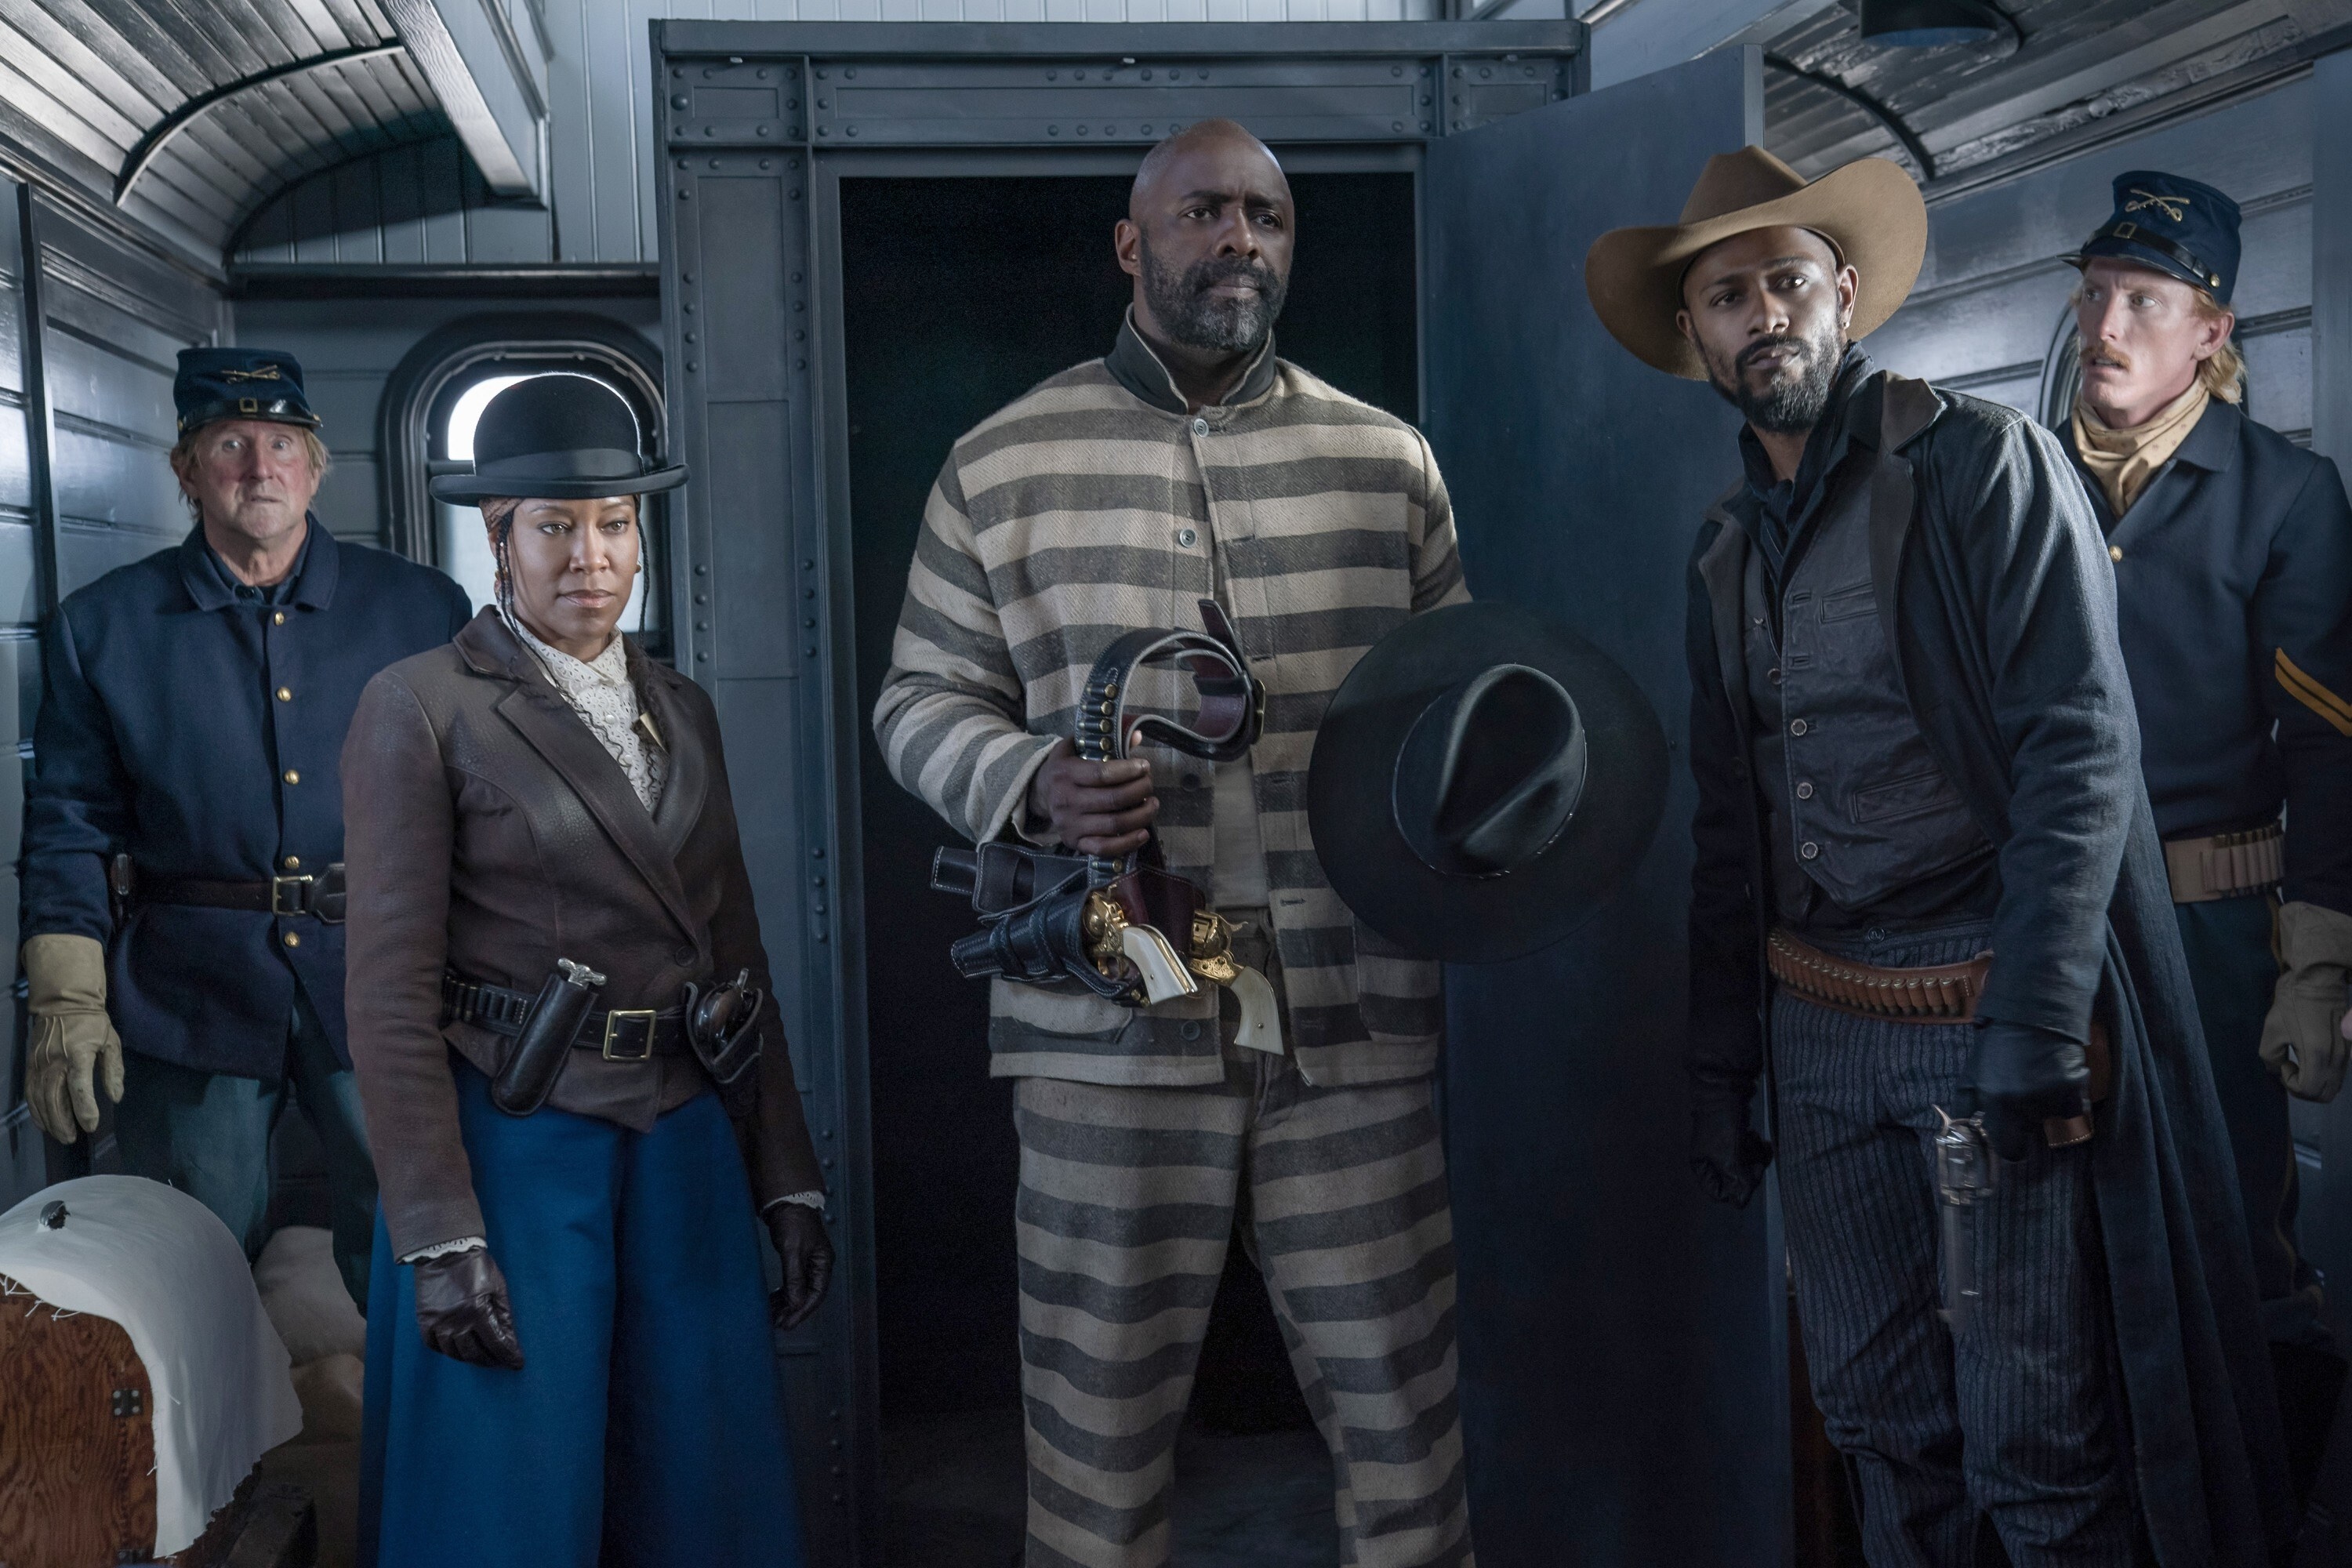 A Black man stands in a prison uniform, he holds a black hat and gun. A Black woman and Black man both in hats and guns stand on either side